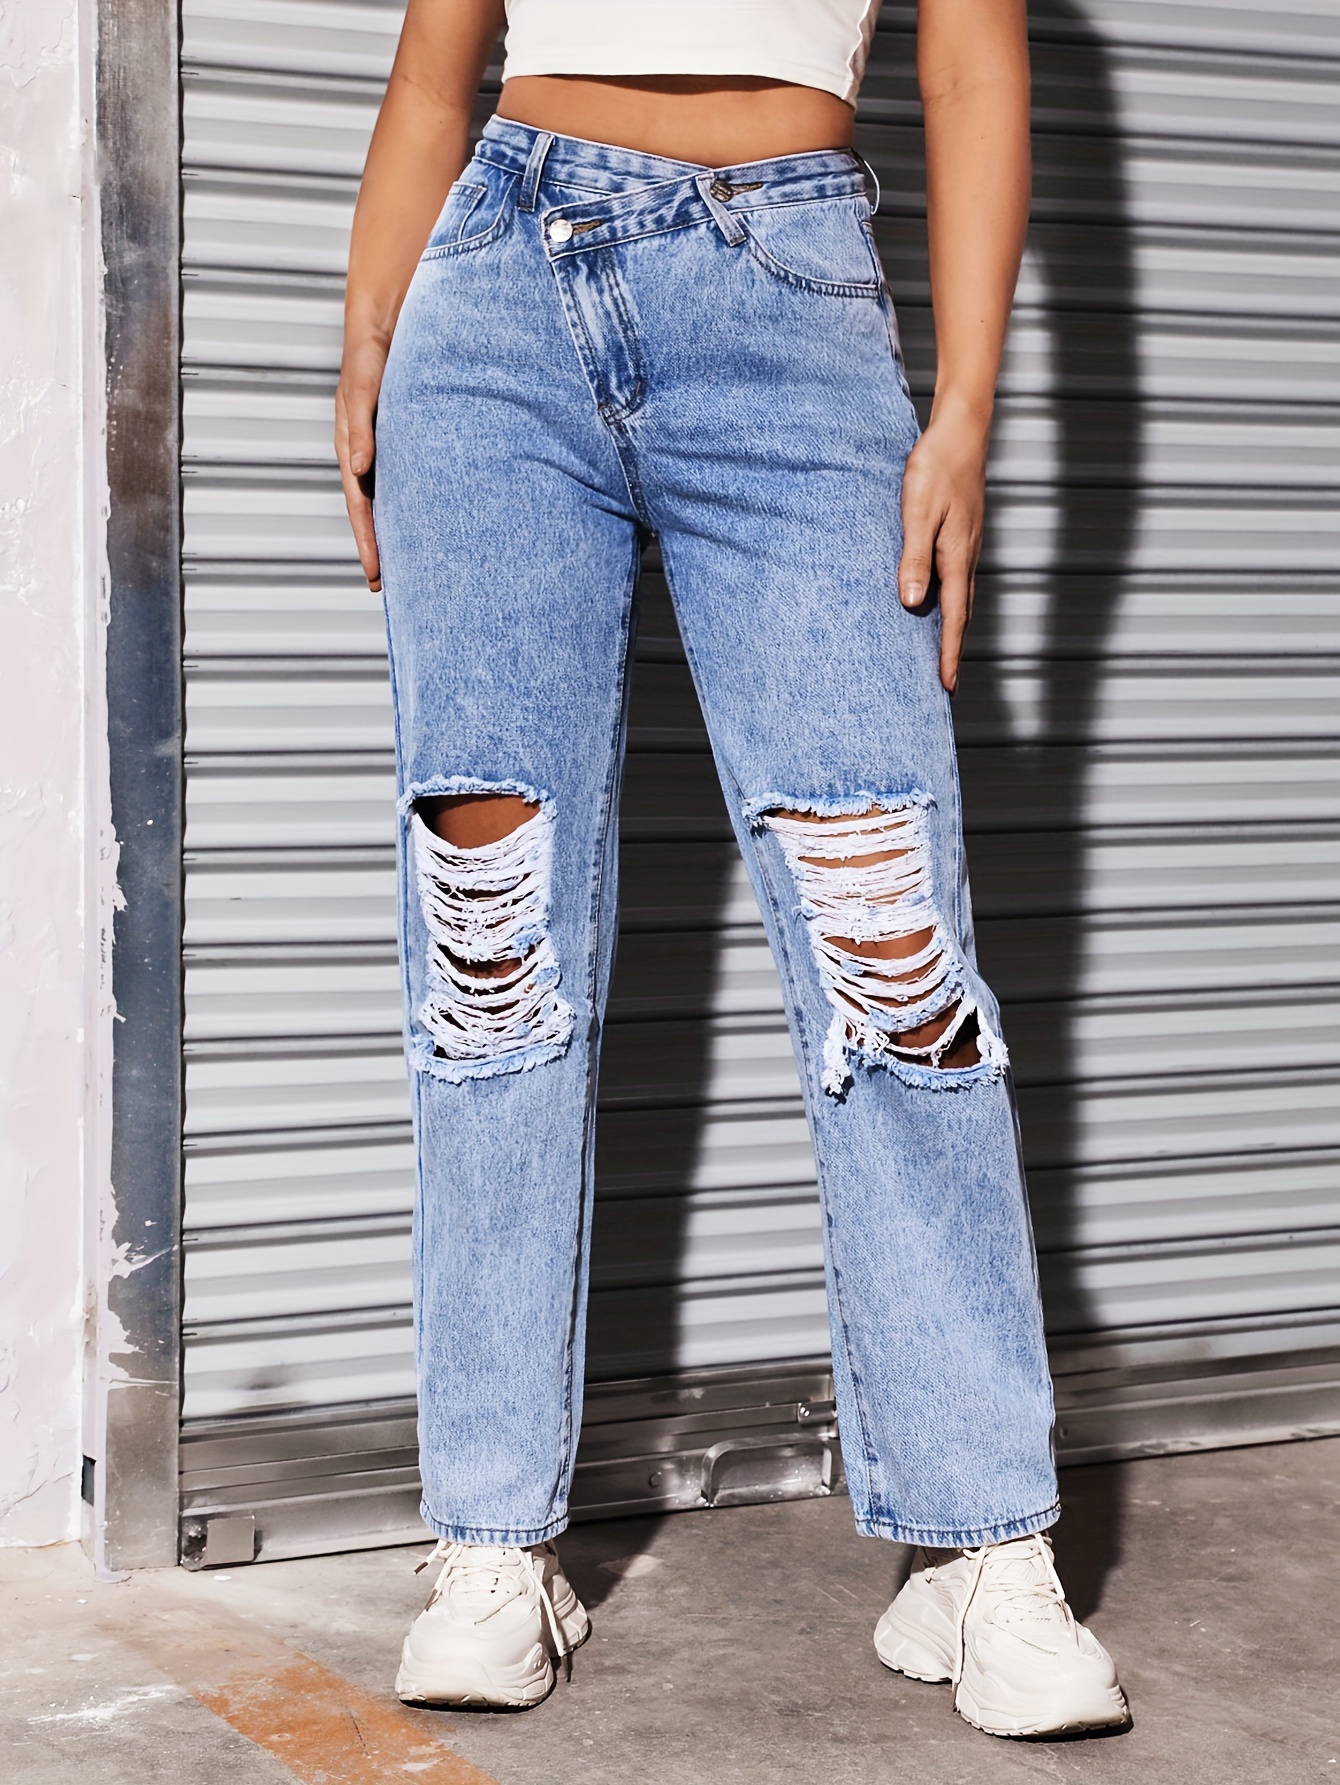 Ripped Distressed High * Jeans, Loose Fit Street Style Straight Denim  Pants, Women's Denim Jeans & Clothing